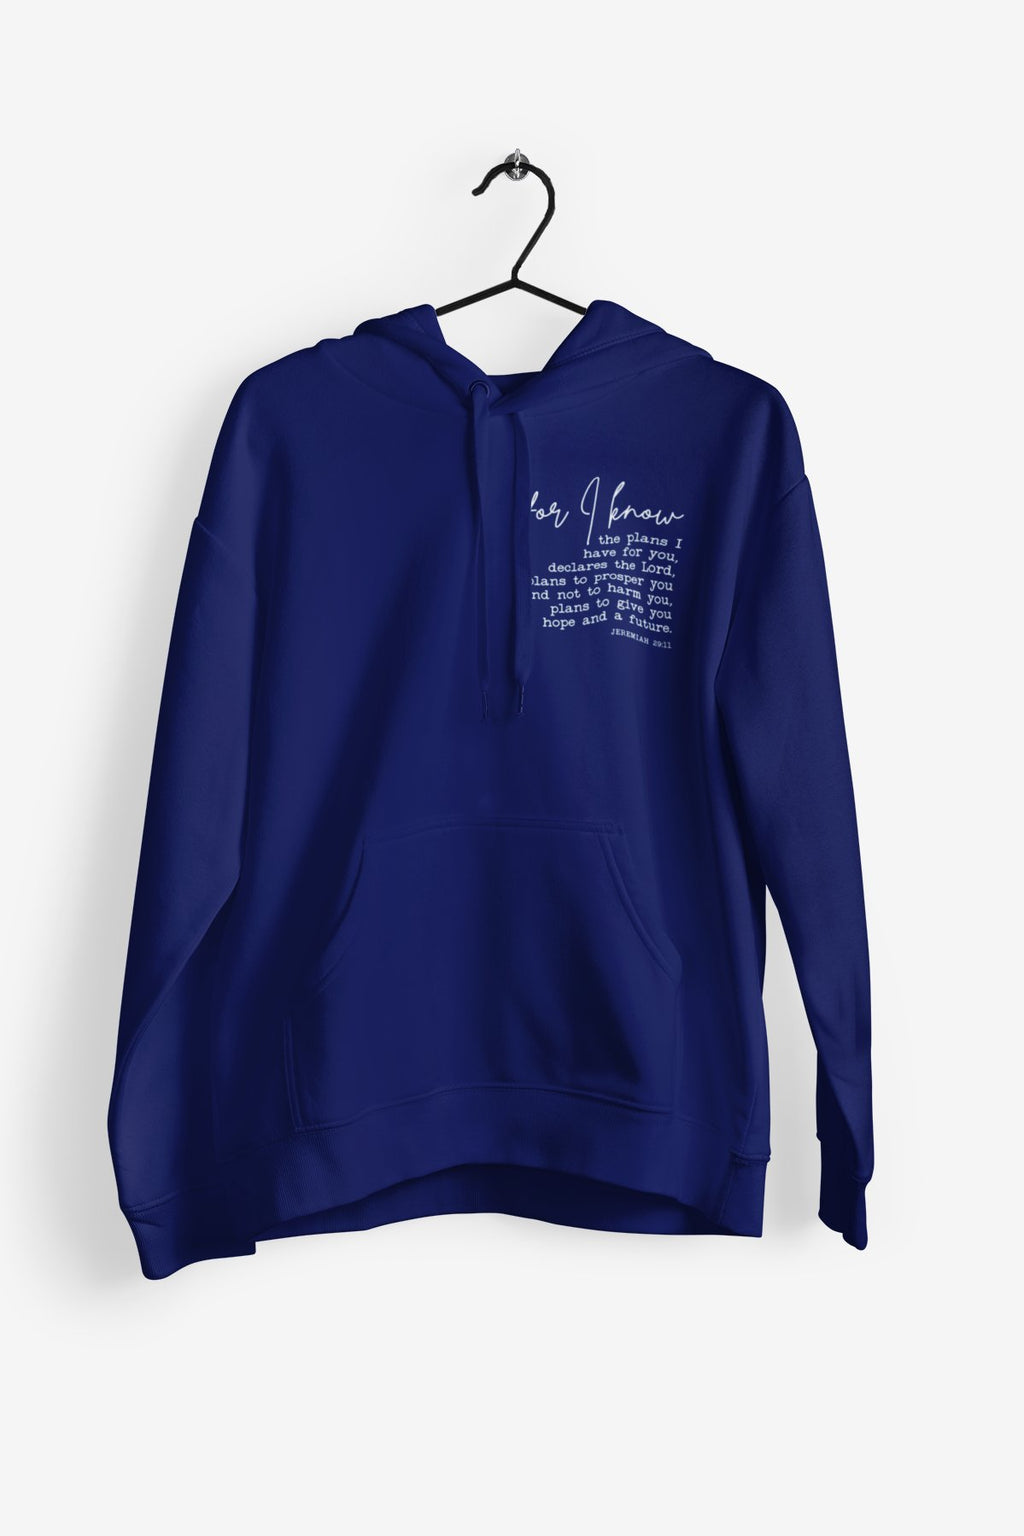 The Plans (Navy Hoodie) - A Meaningful Mood